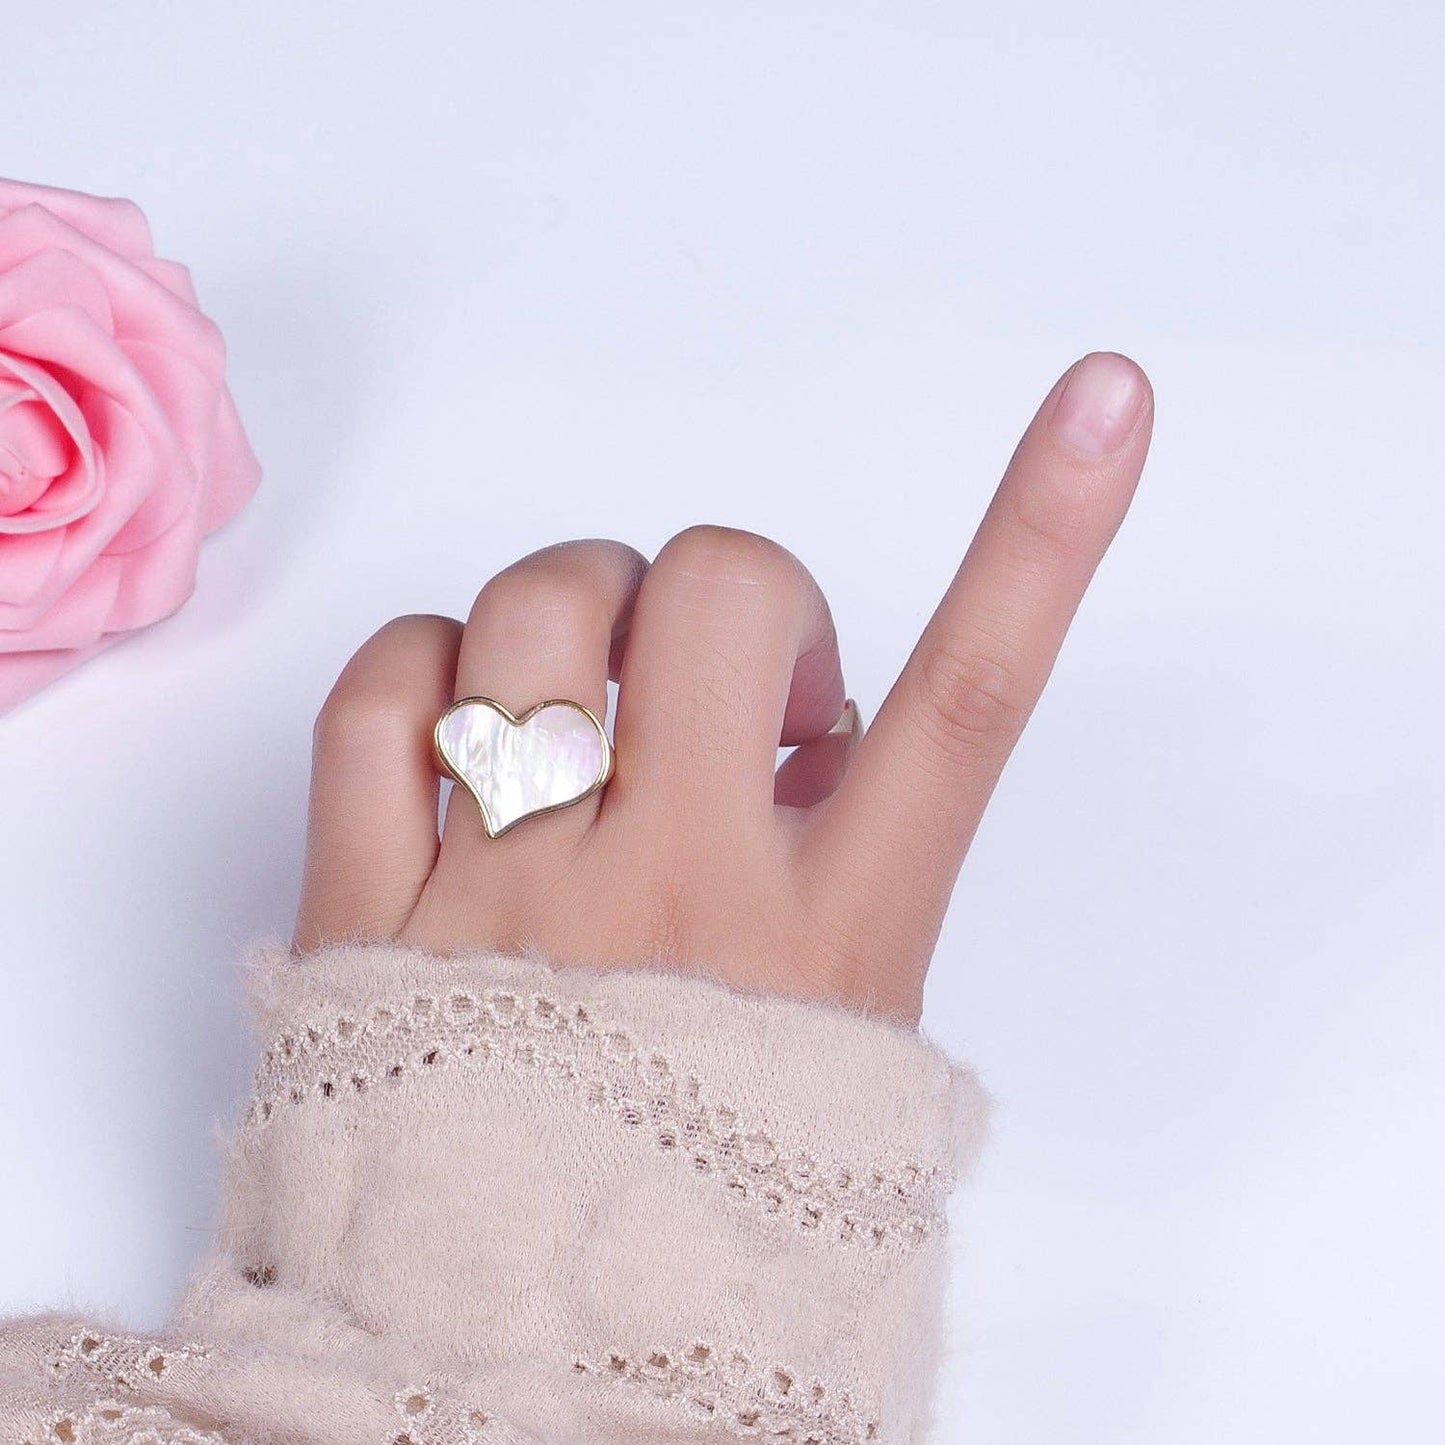 Timeless Elegance: Gold-Filled Love Heart White Shell Pearl Wide Band Ring